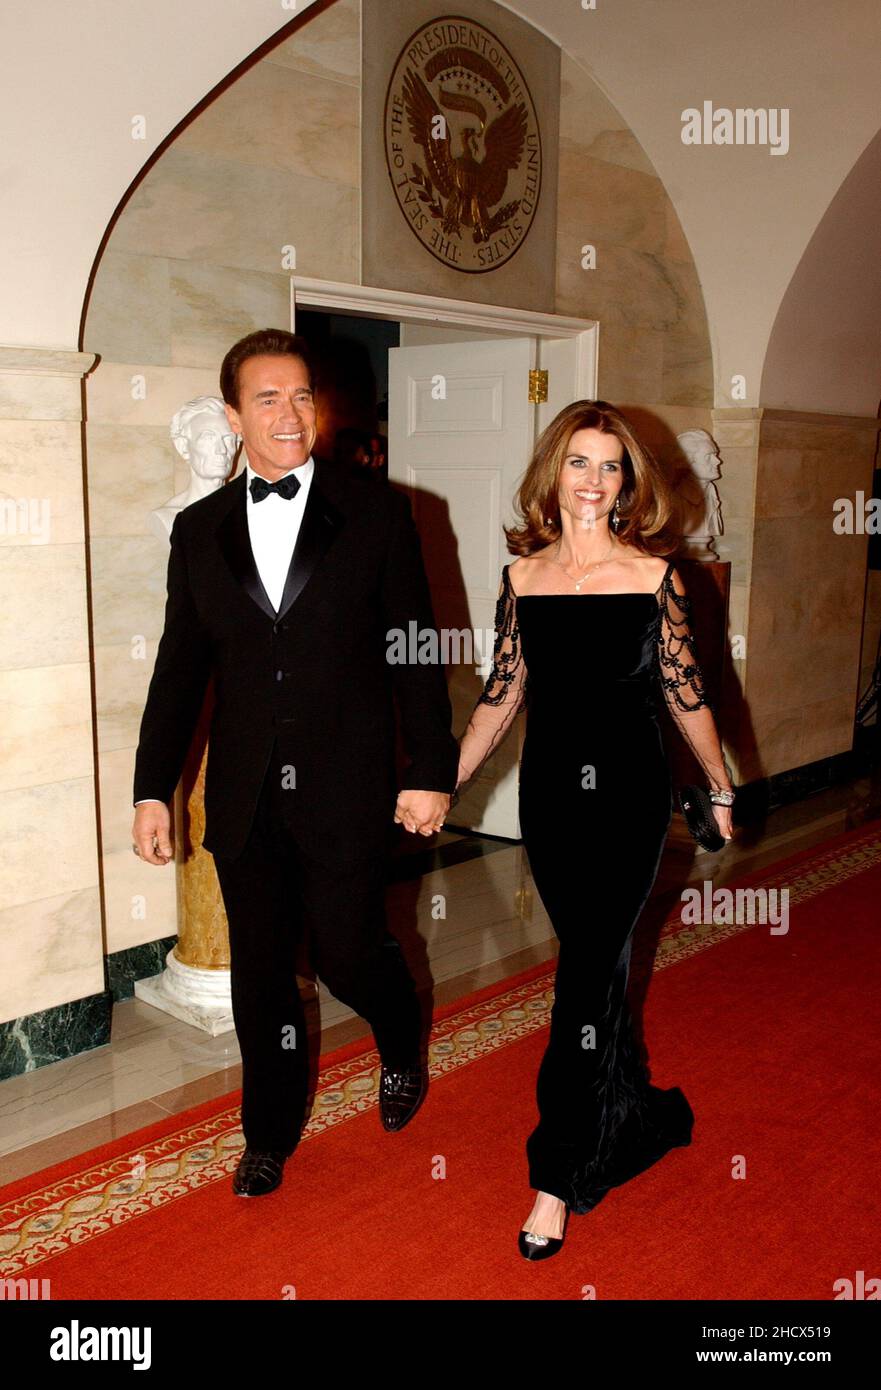 Washington, DC - February 22, 2004 -- California Governor Arnold Schwarzenegger and his wife, Maria Shriver, arrive at the White House in Washington, DC on February 22, 2004.  They were attending the 2004 National Governors Association Dinner with United States President George W. Bush..Credit: Ron Sachs / CNP Stock Photo